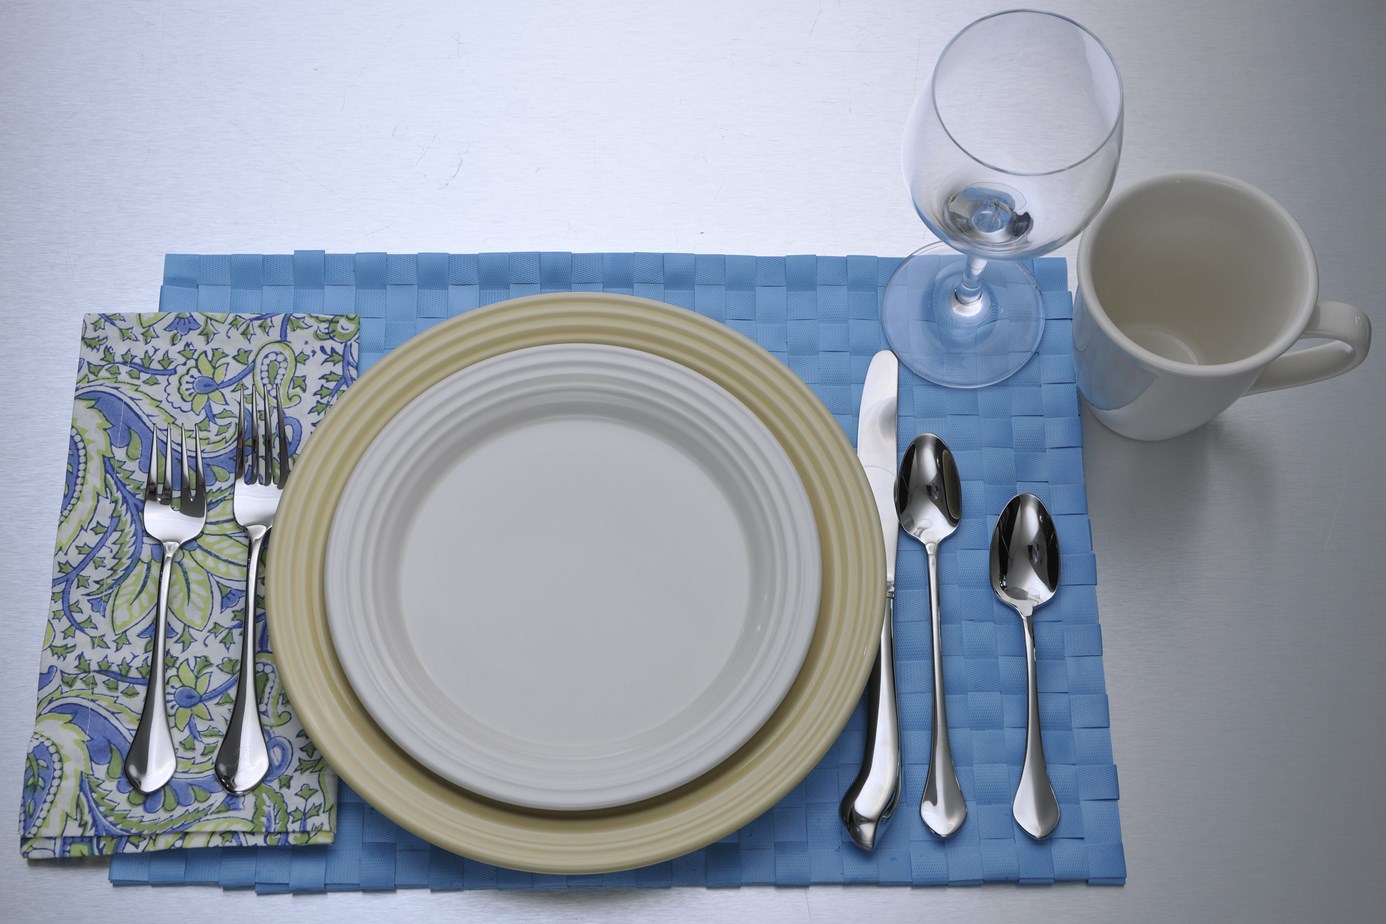 Where Does The Salad Plate Go In A Table Setting?